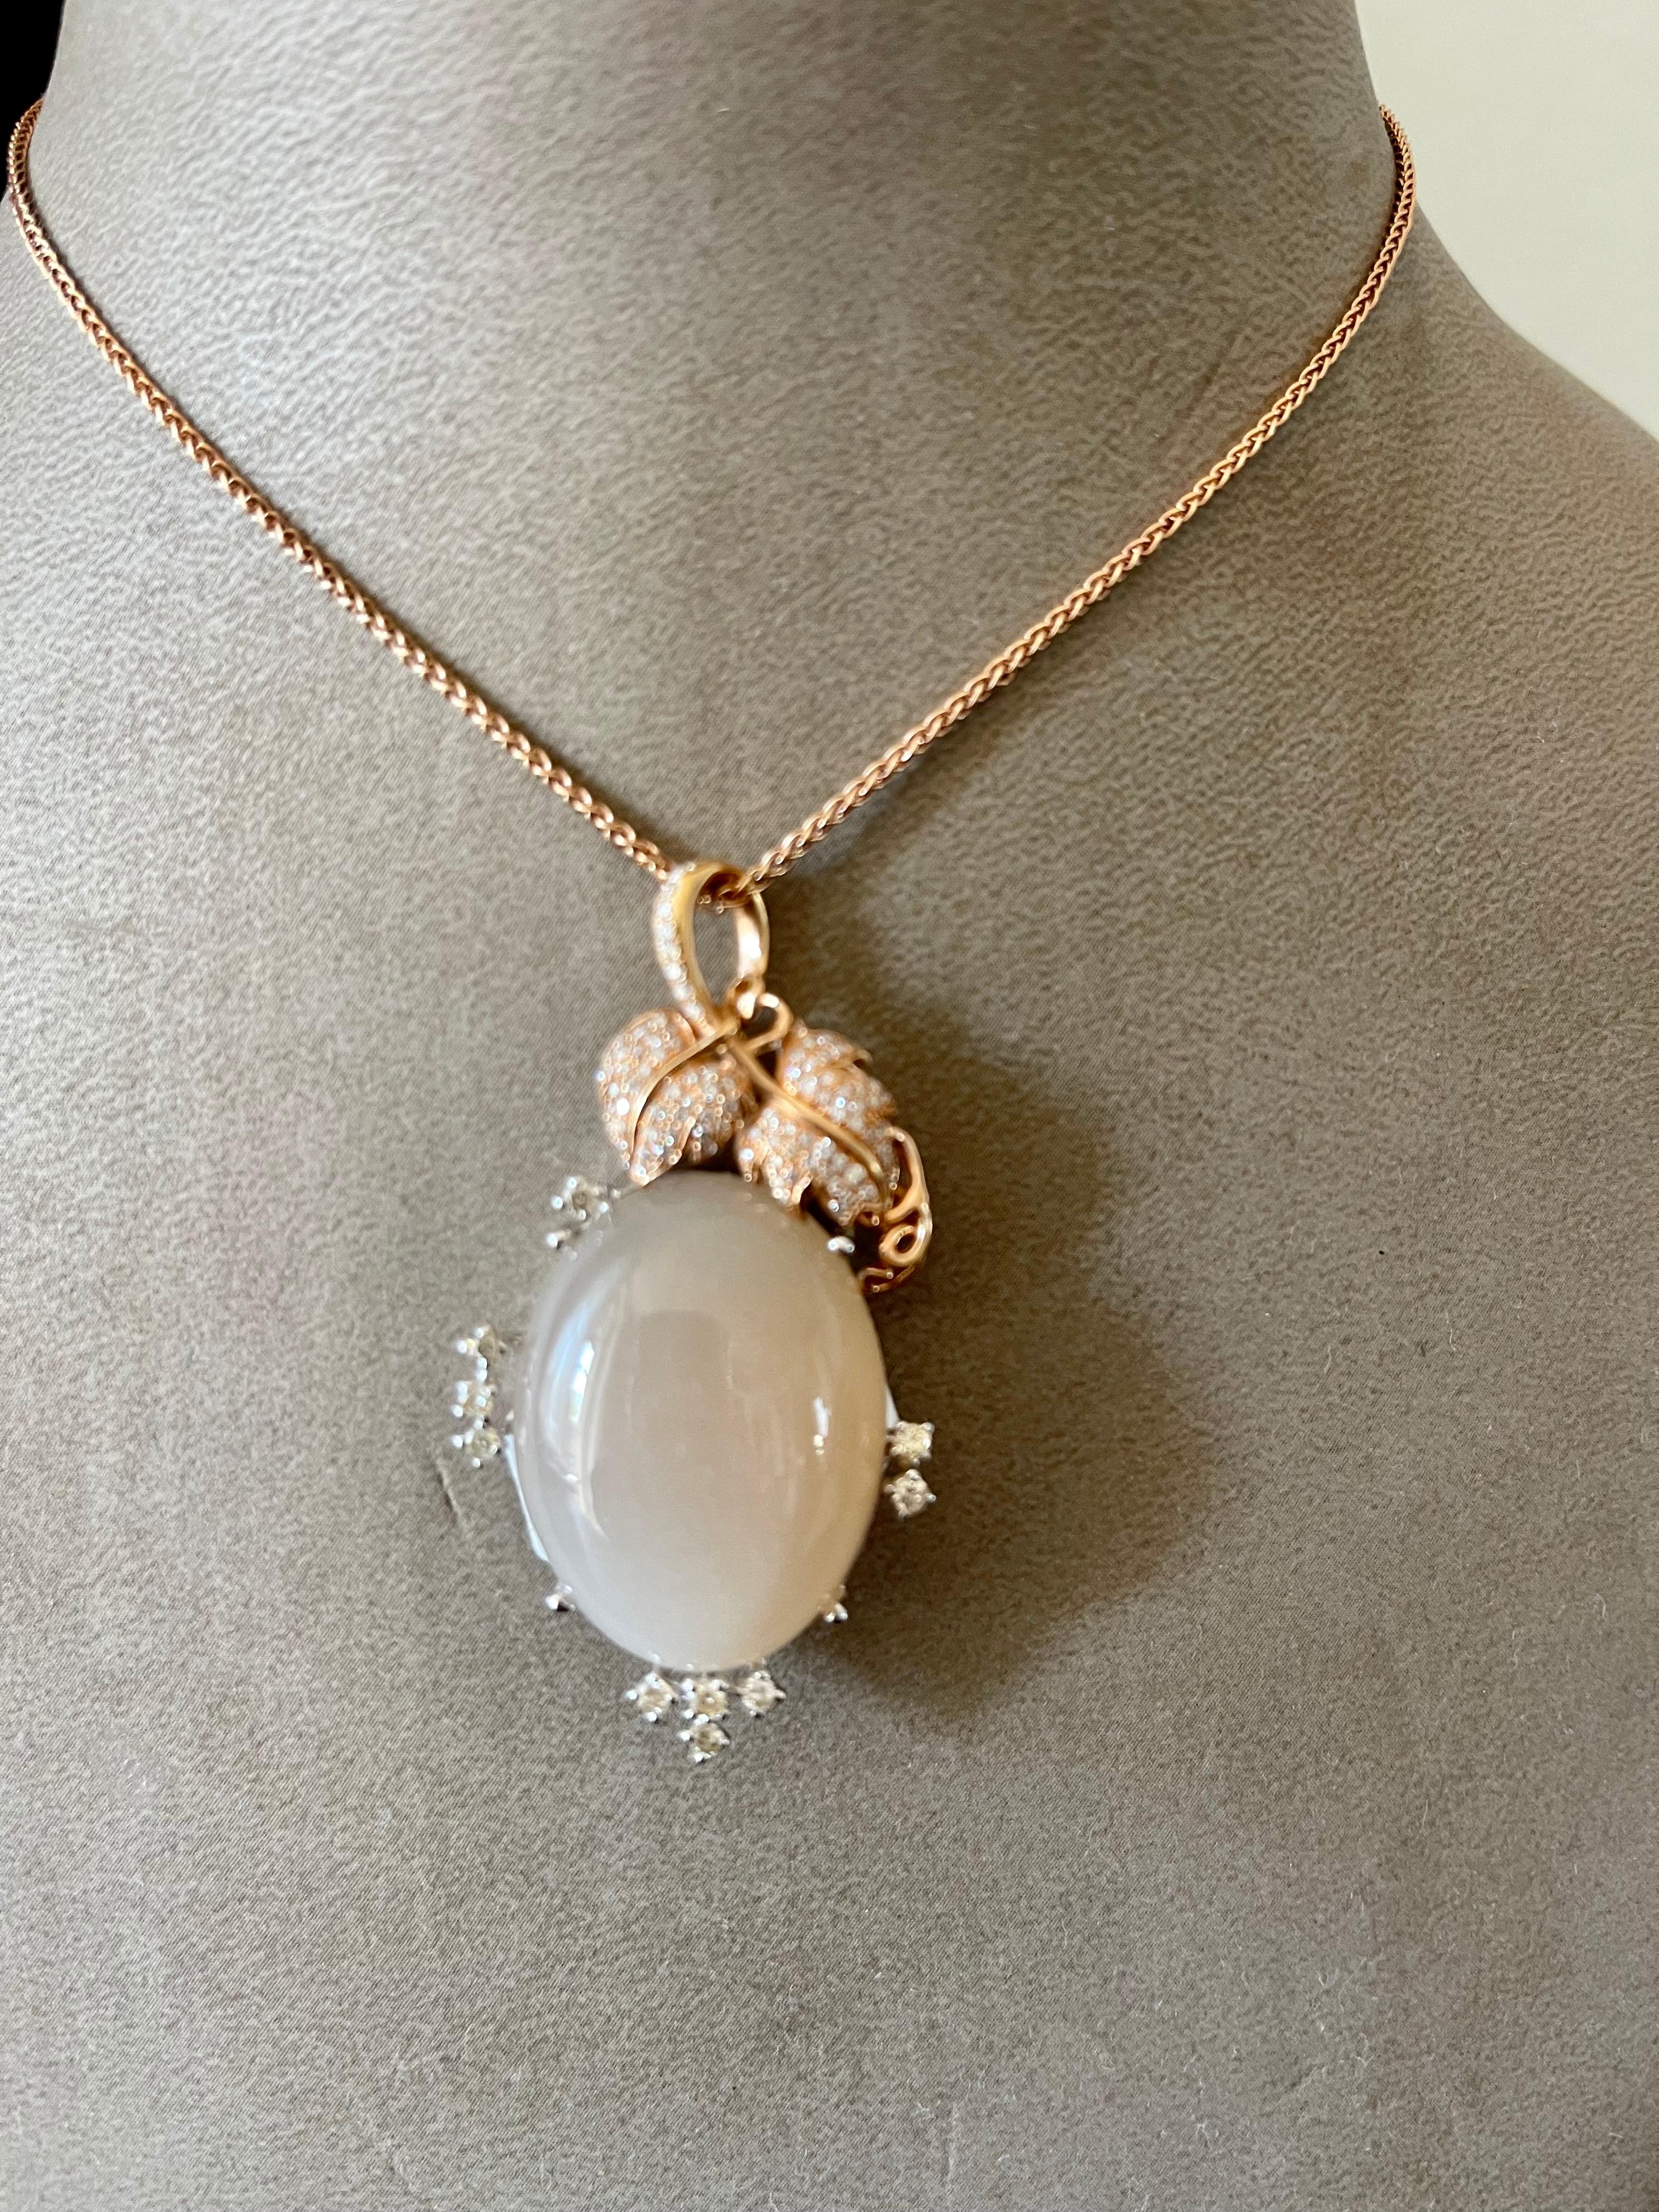 A very romantic and floral pendant featuring a brownish silvery moonstone Cabochon weighing 42.72 ct and decorated with 104 brilliant cut Diamonds weighing 0.64 ct. Set in 18 K white and rose Gold. The pendant comes with a timeless 18 K rose Gold